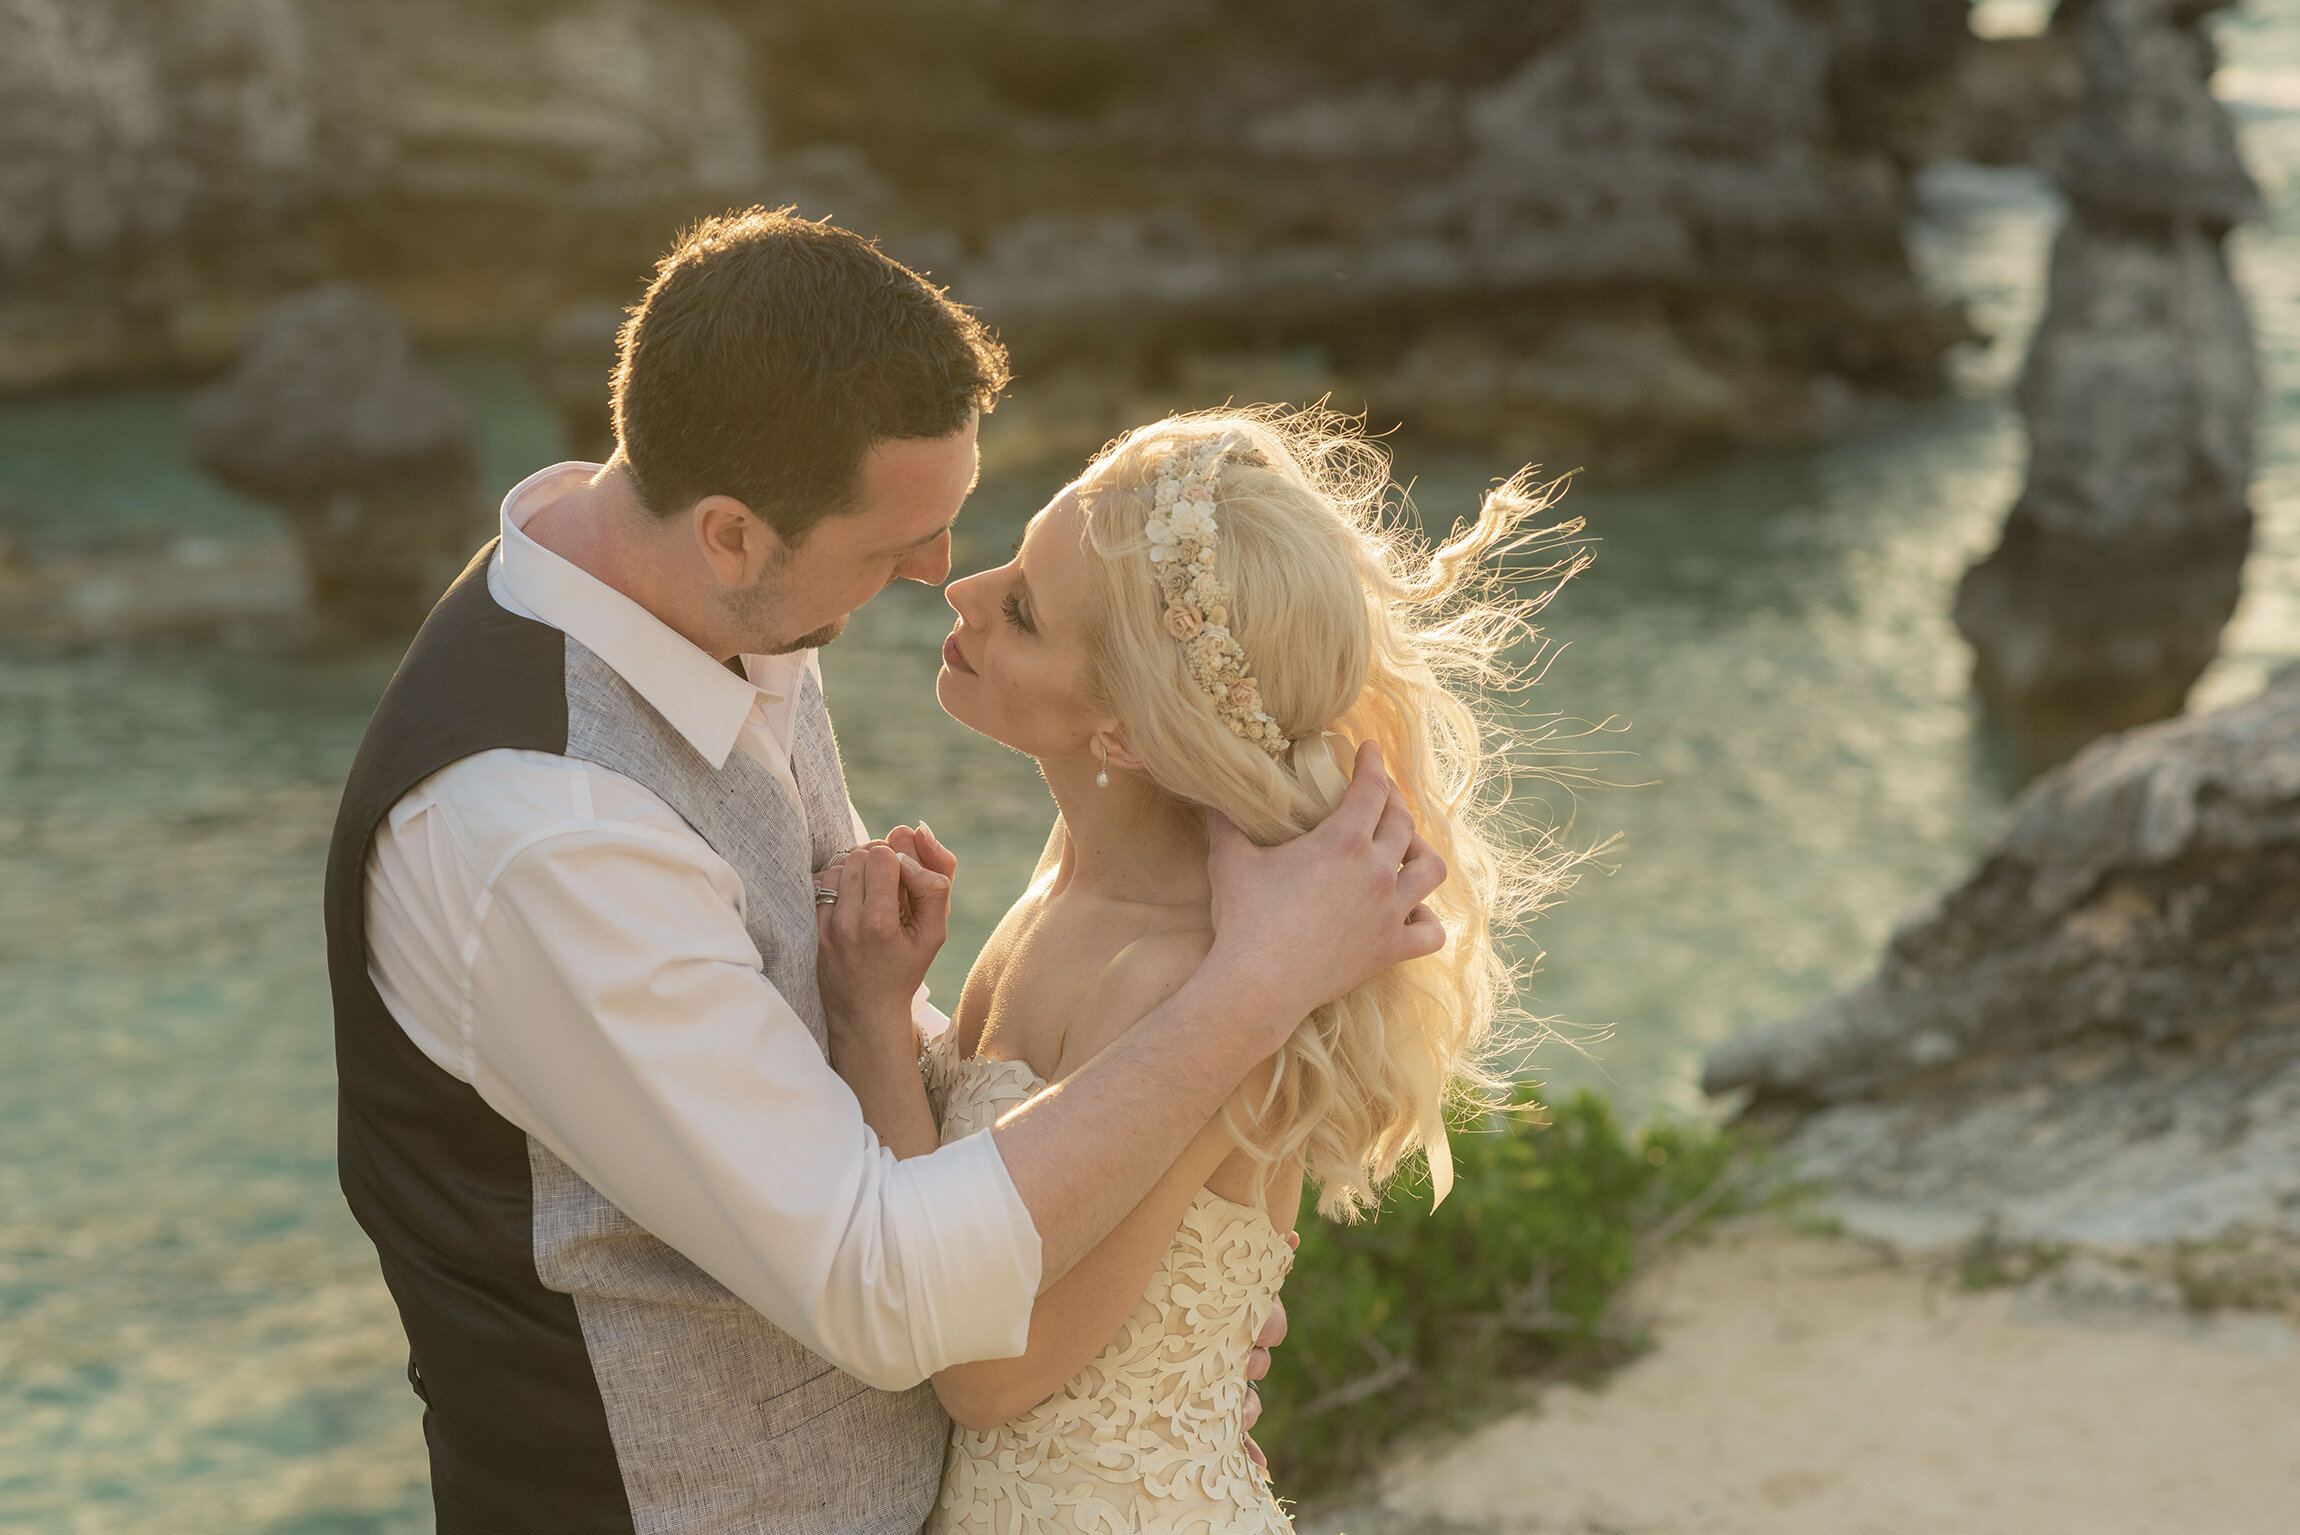    Elopement: Stephanie &amp; Rick    -  Held at The  Unfinished Church  &amp; Planned by  Bridal Suite Bermuda  